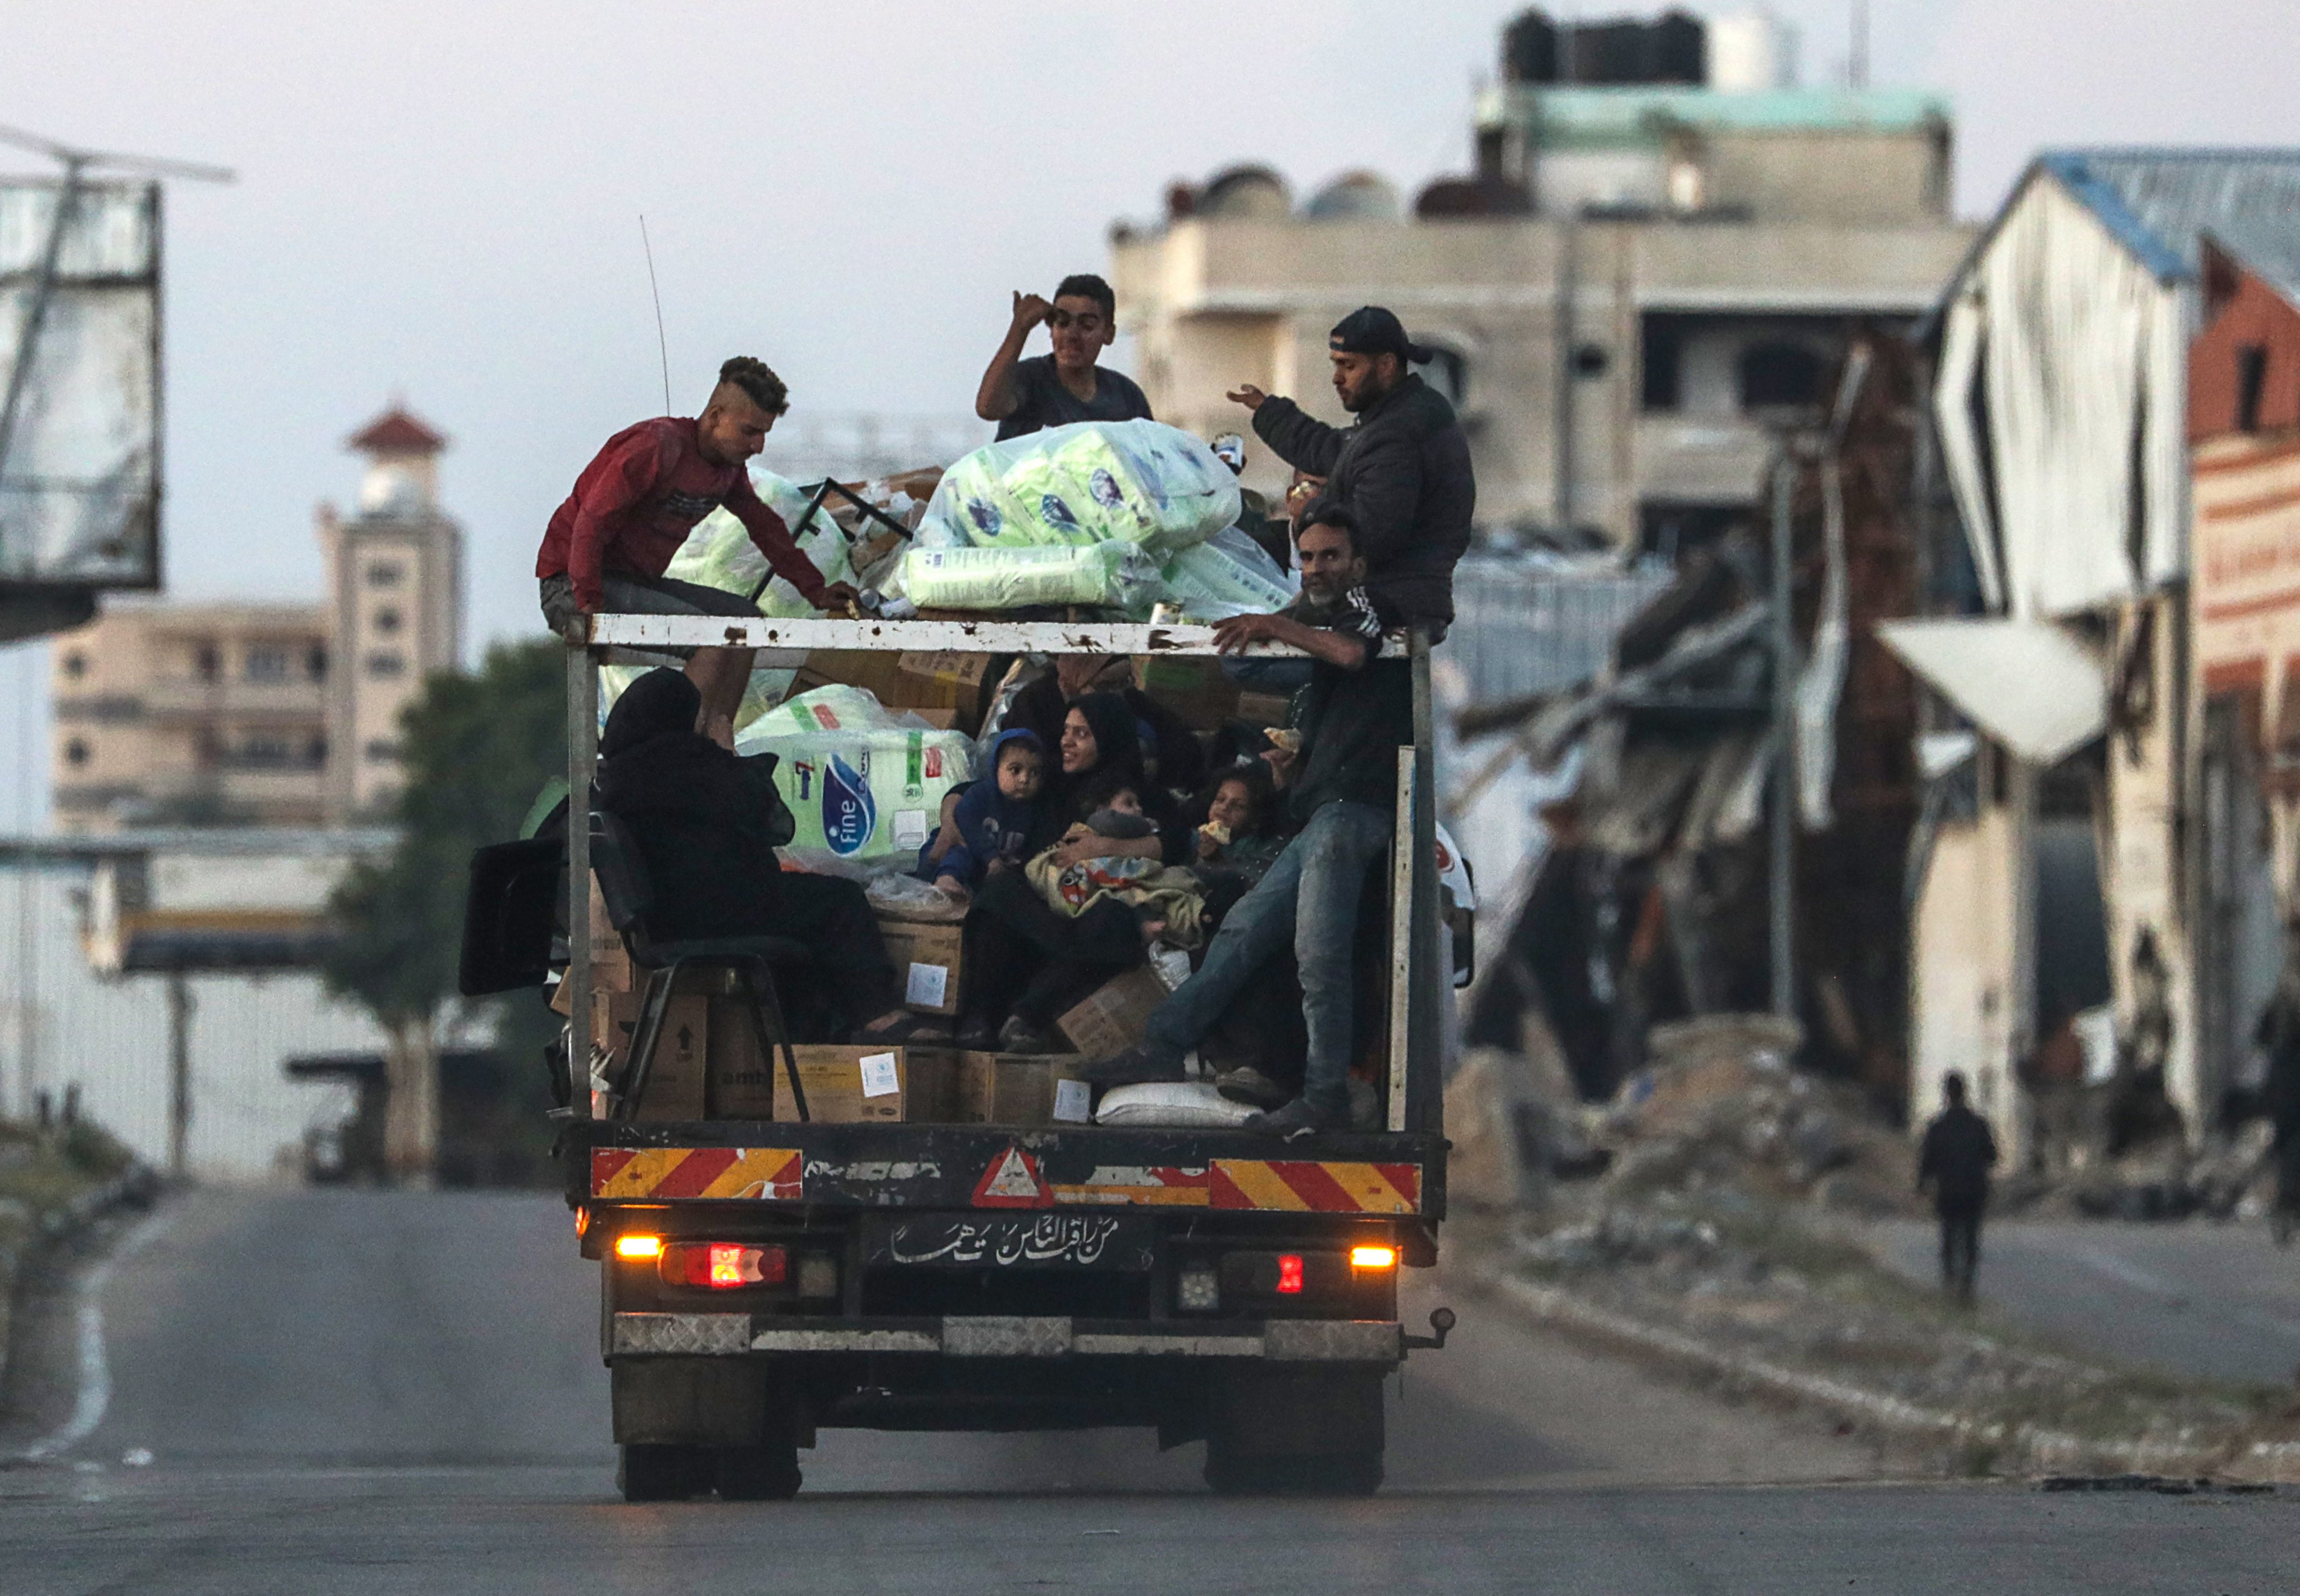 Palestinians leave with their belongings following an evacuation order issued by the Israeli army in the southern Gaza city of Rafah on Monday. Photo: EPA-EFE